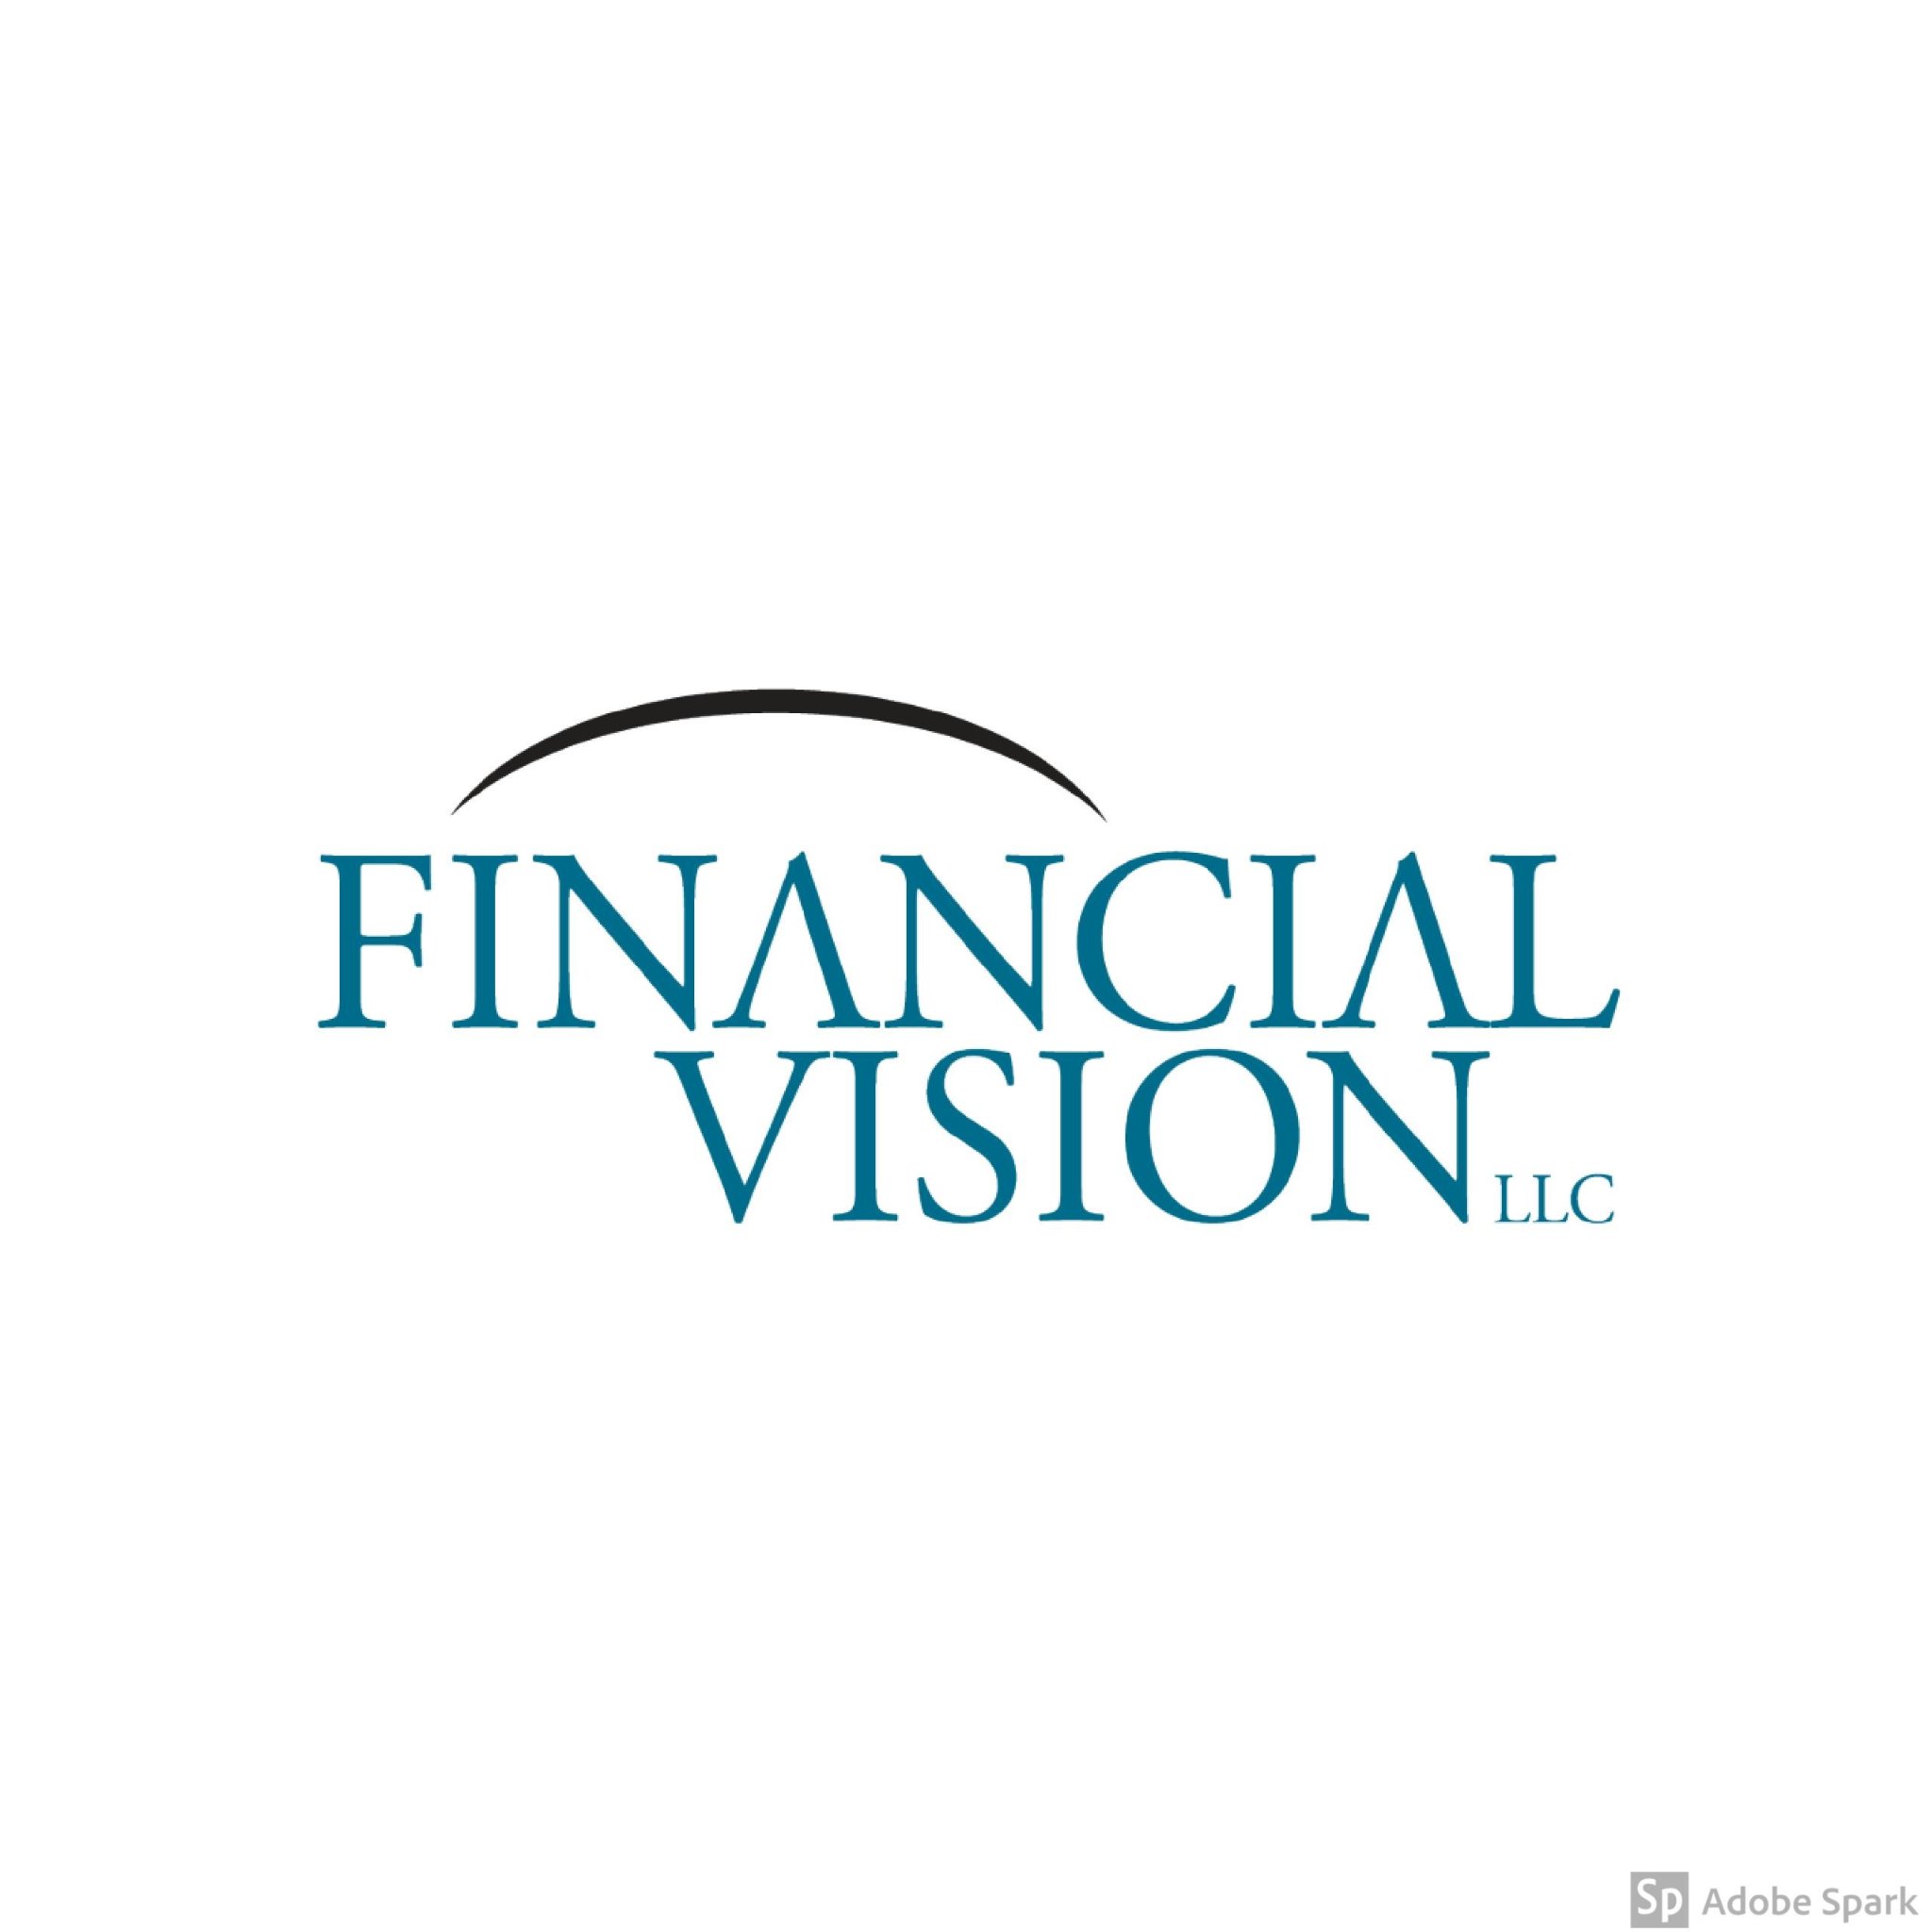 At Financial Vision LLC we take care of you.

Please see https://t.co/eLlBukHHbO for full Disclosures.